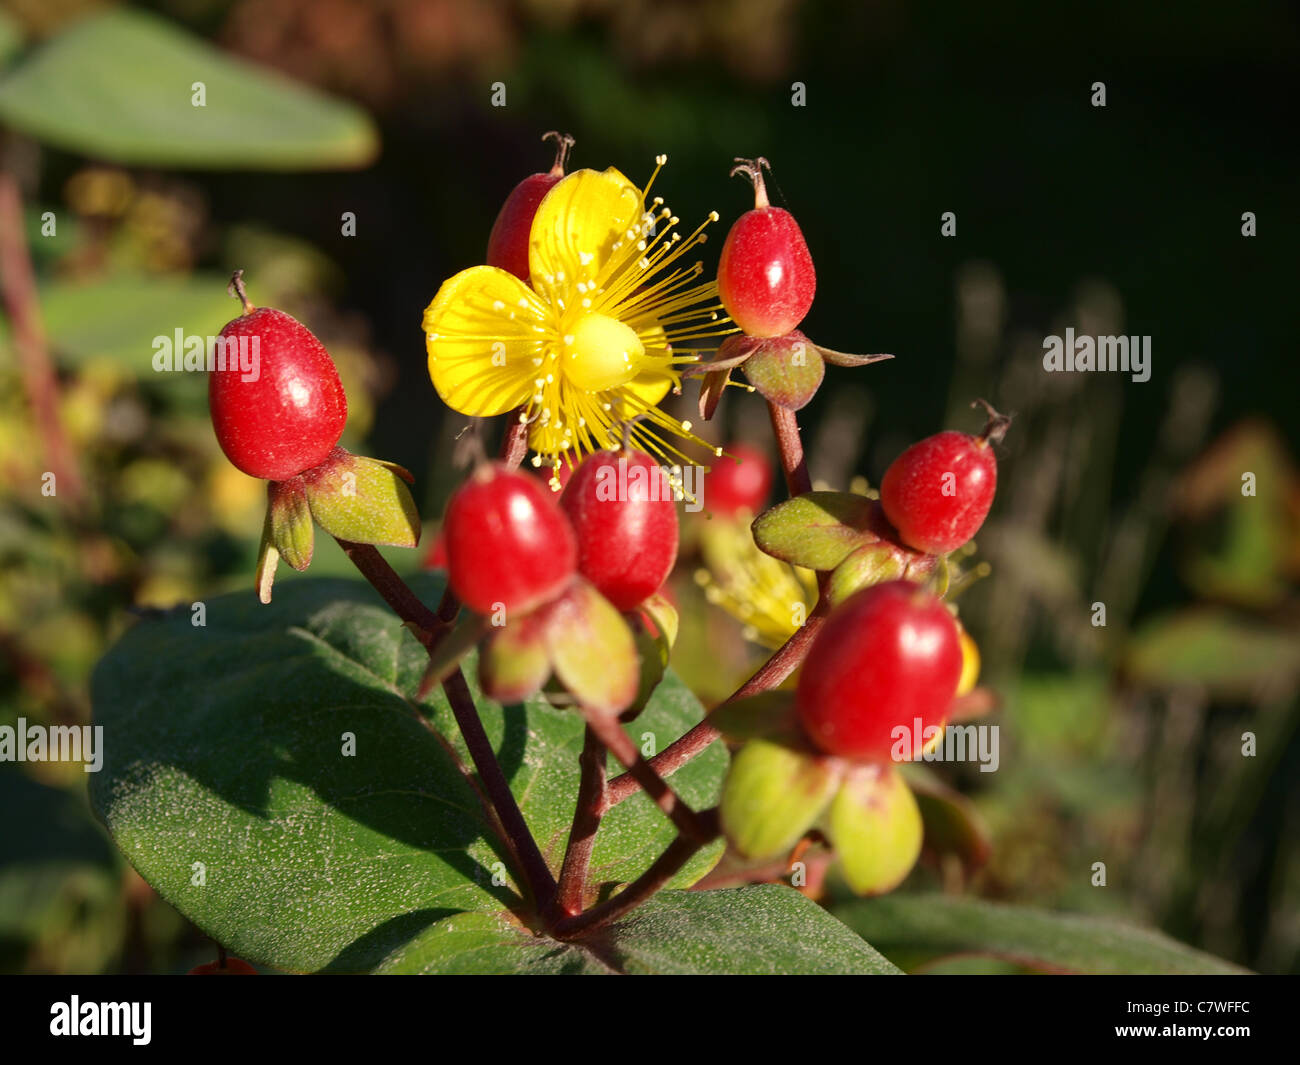 A close up shot of a yellow flower surrounded by small red berries. Stock Photo